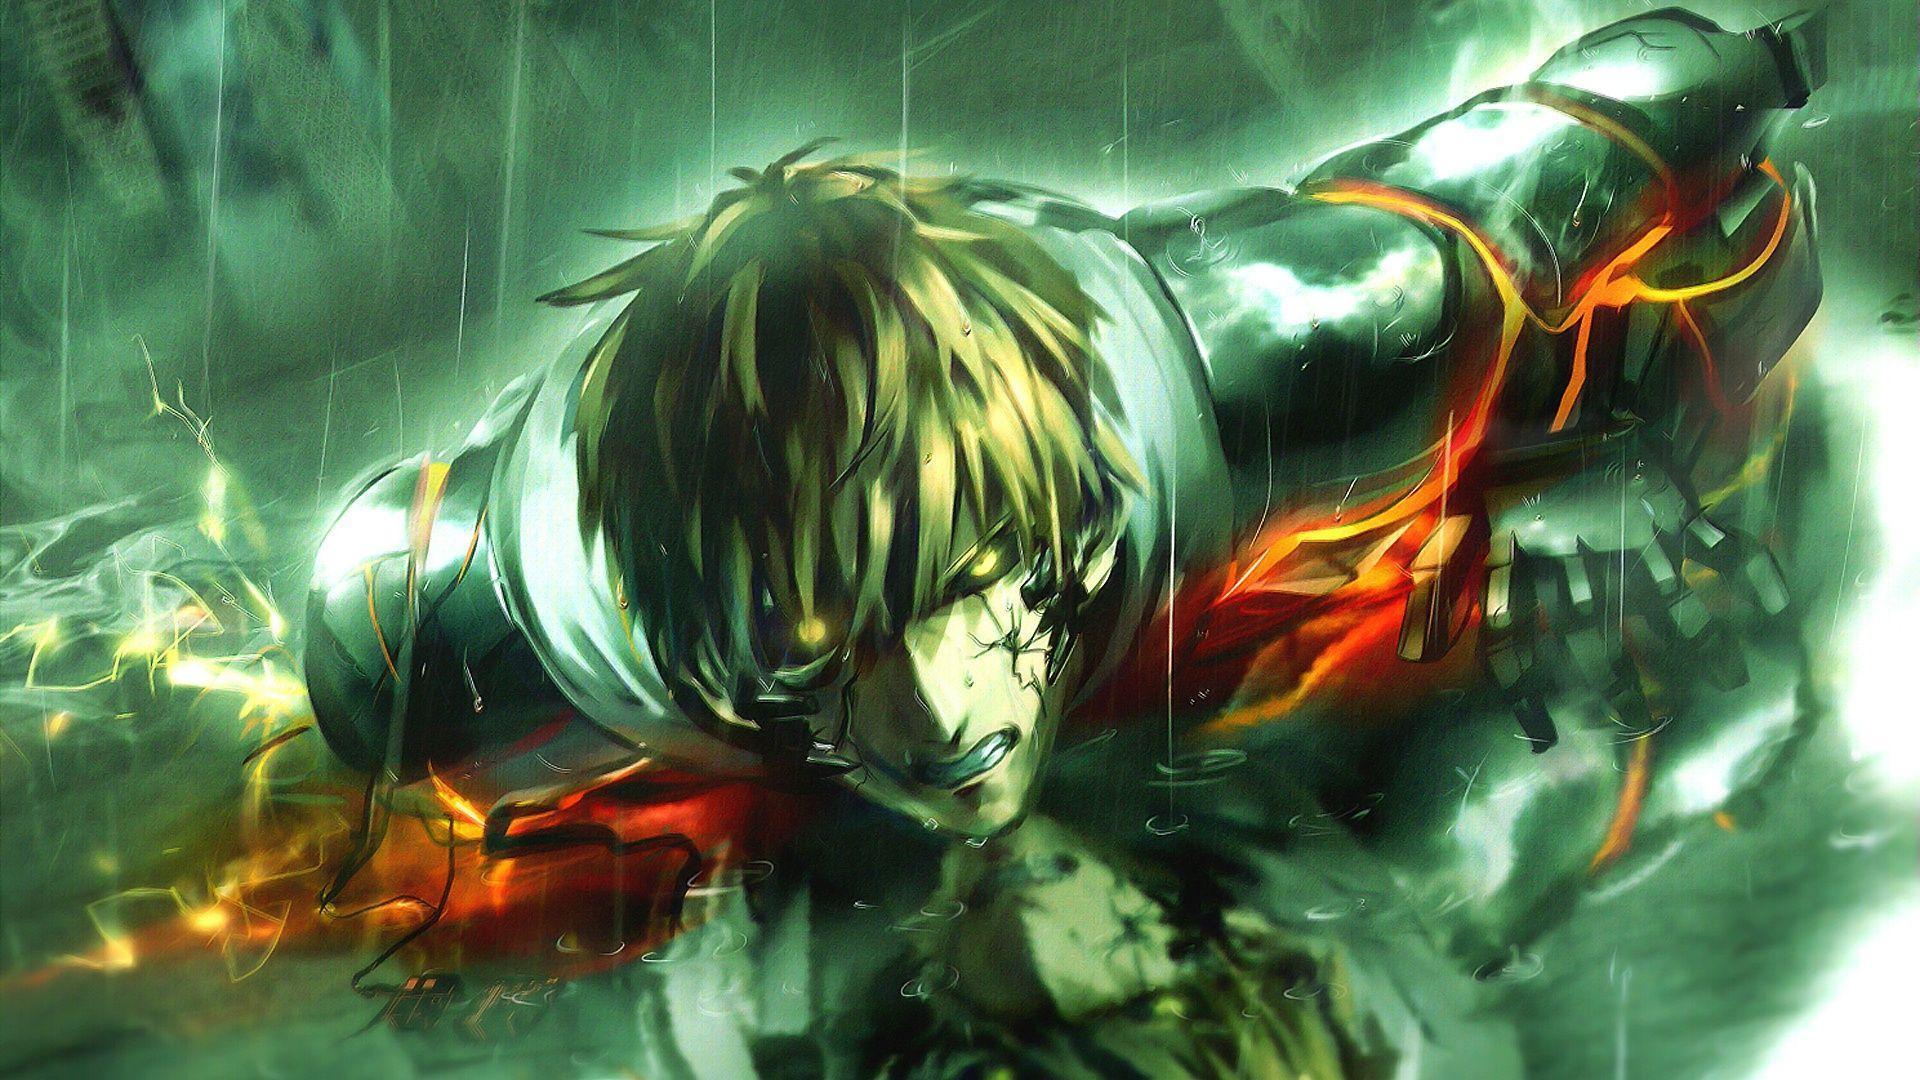 One Punch Man Hd Wallpaper 4k Download Full Screen, One-Punch Man, Anime